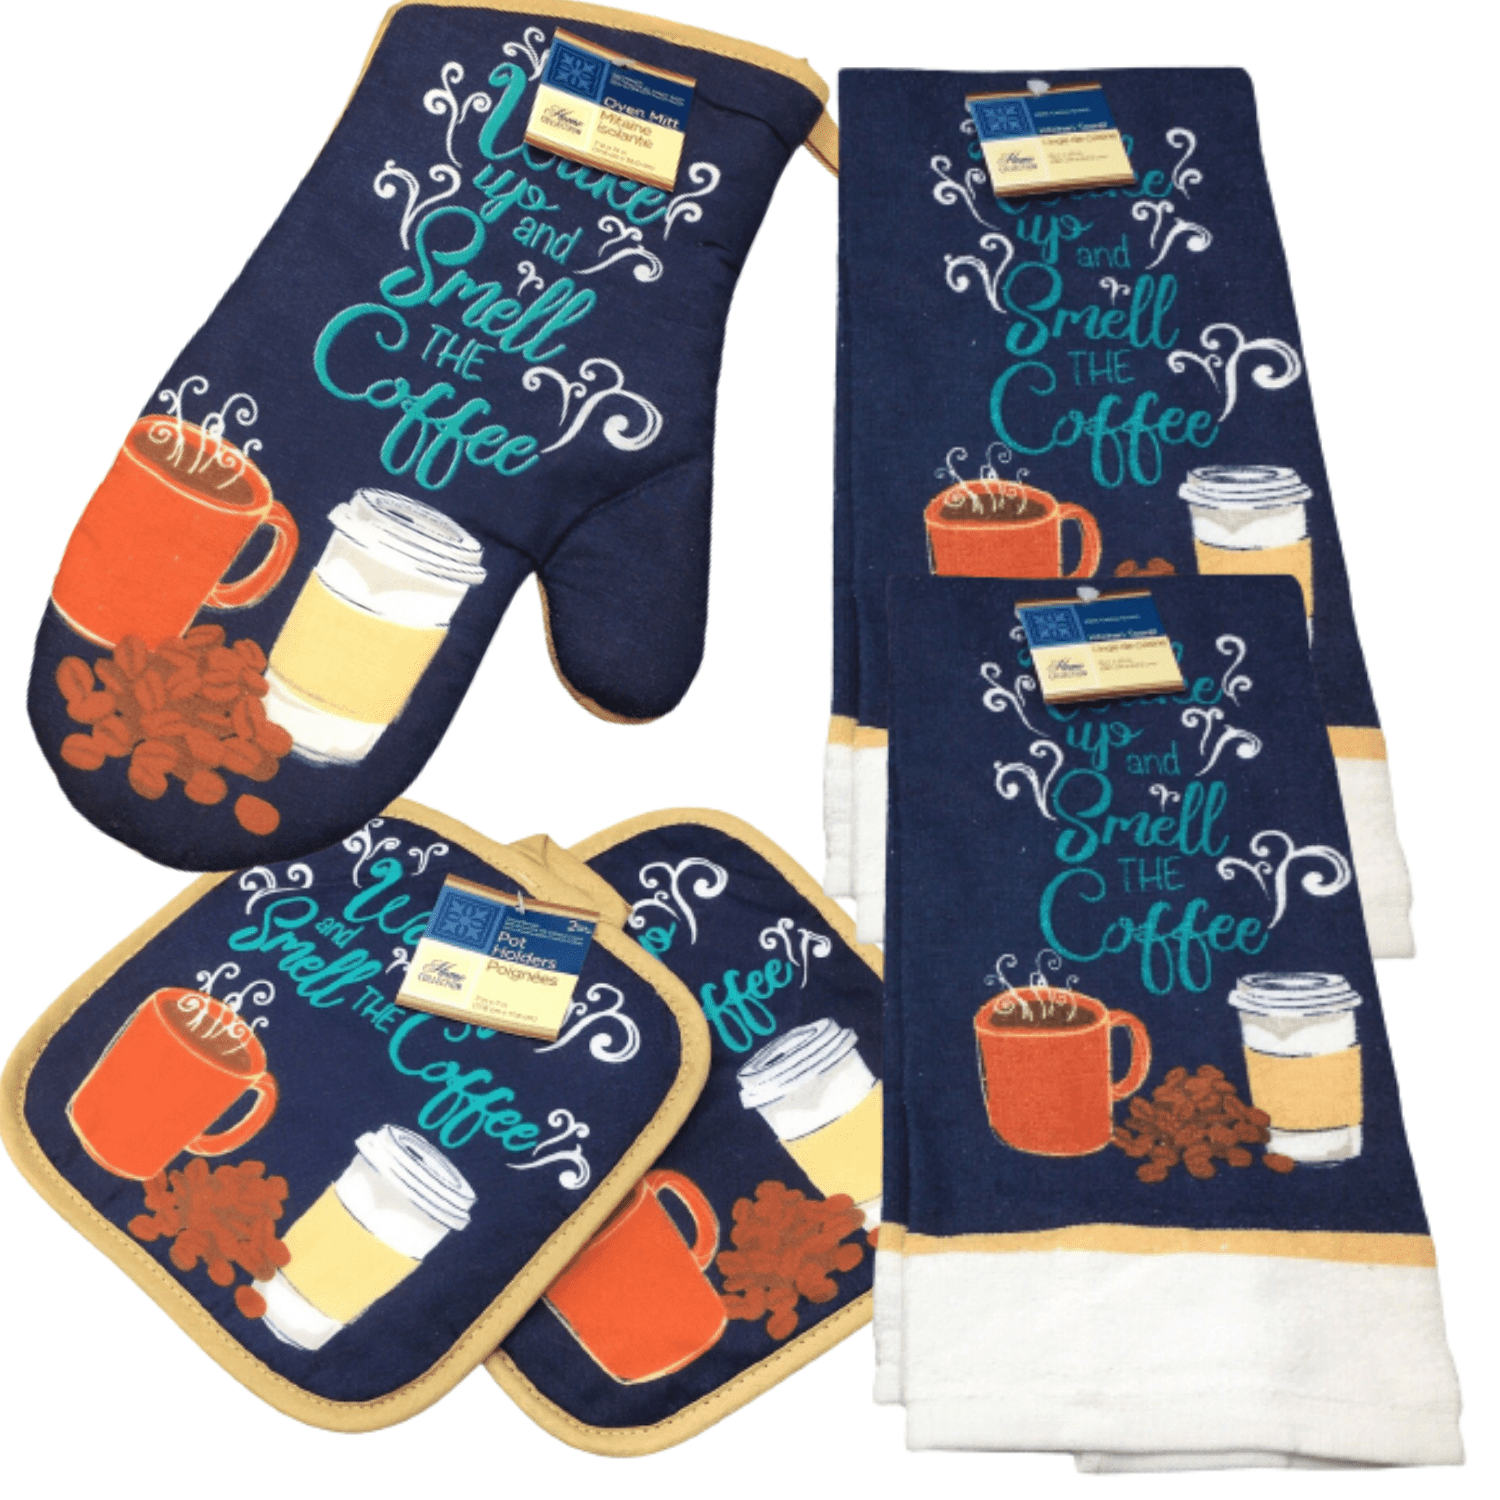 2 POT HOLDERS,1 OVEN MITT & 2 TOWELS COFFEE BISTRO,MS Details about   7 pc KITCHEN SET 2 RAGS 